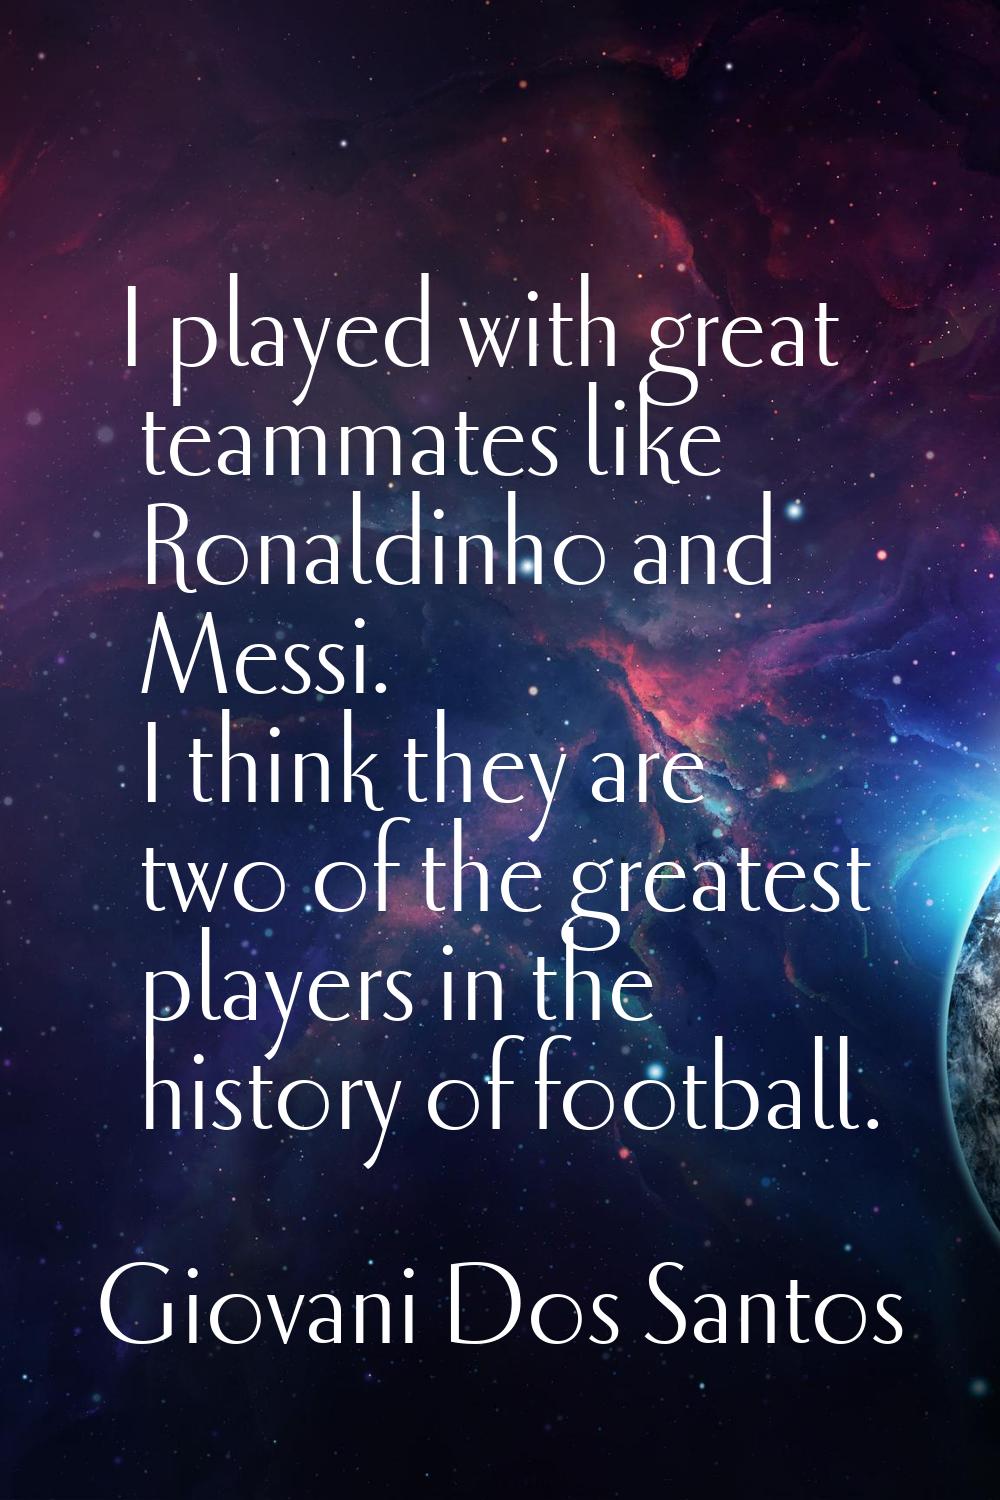 I played with great teammates like Ronaldinho and Messi. I think they are two of the greatest playe